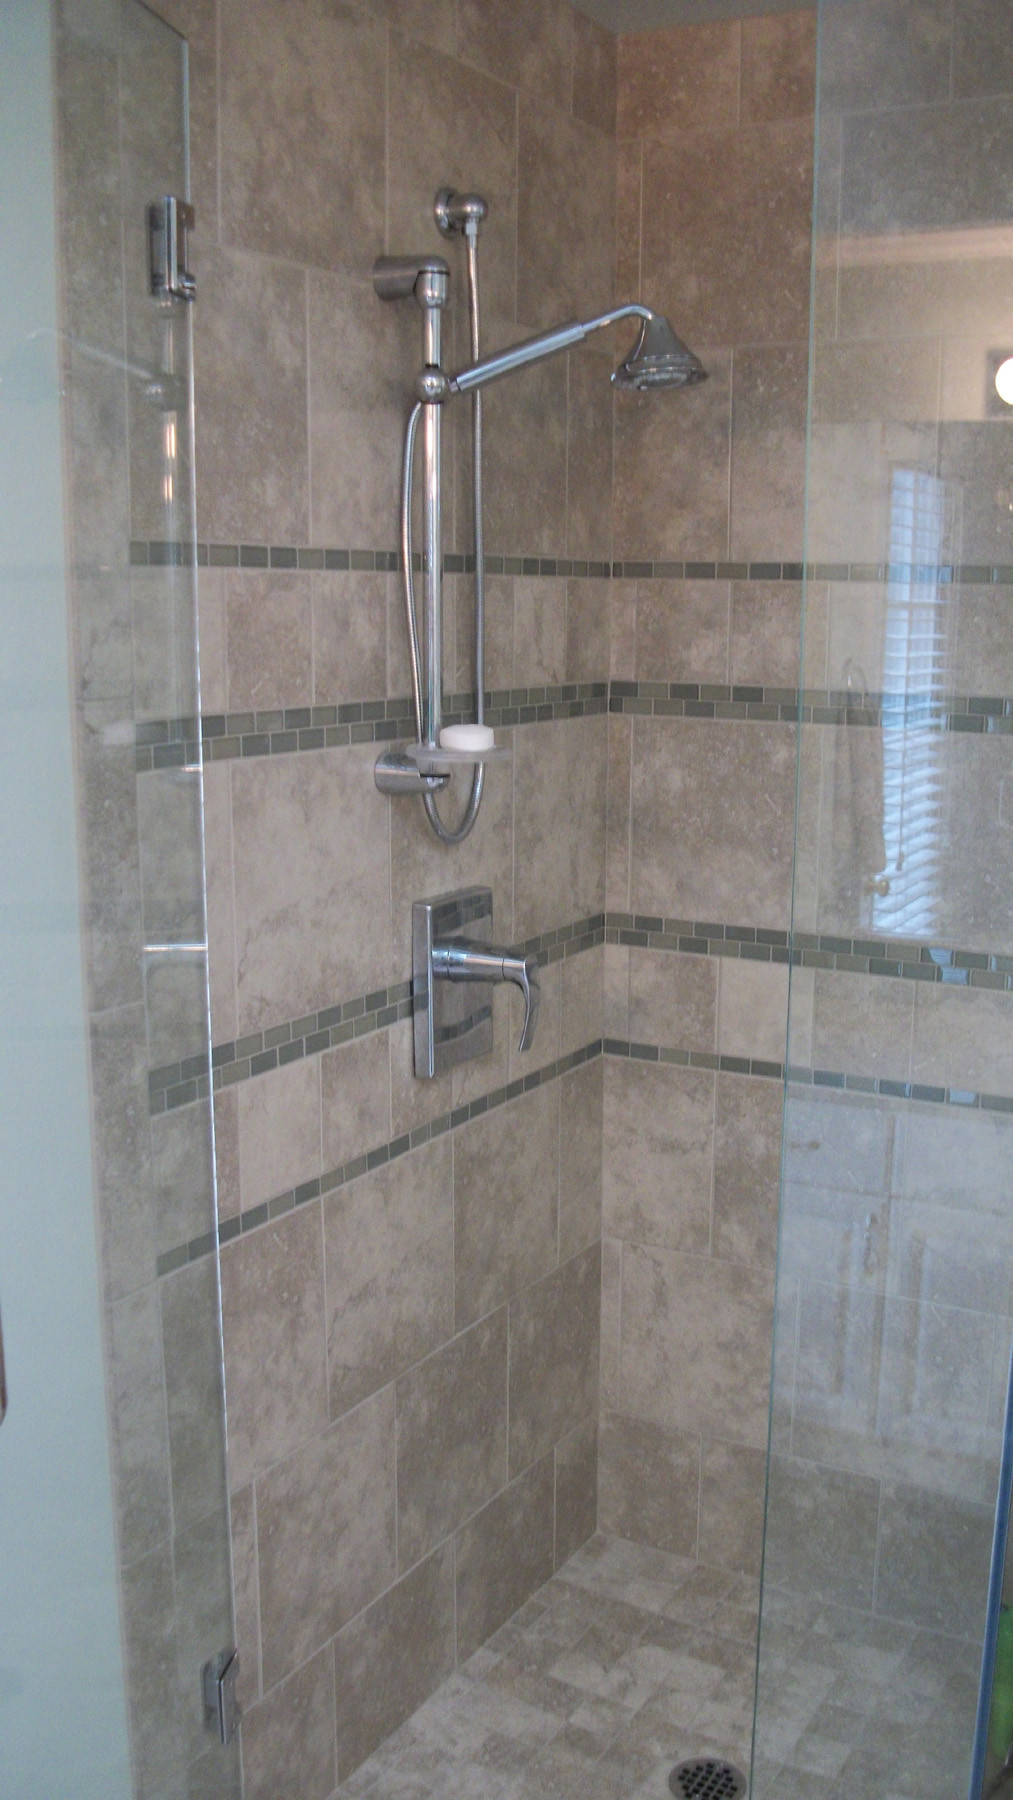 Bathroom Showers Pictures
 Bath remodel featuring Schon free standing tub